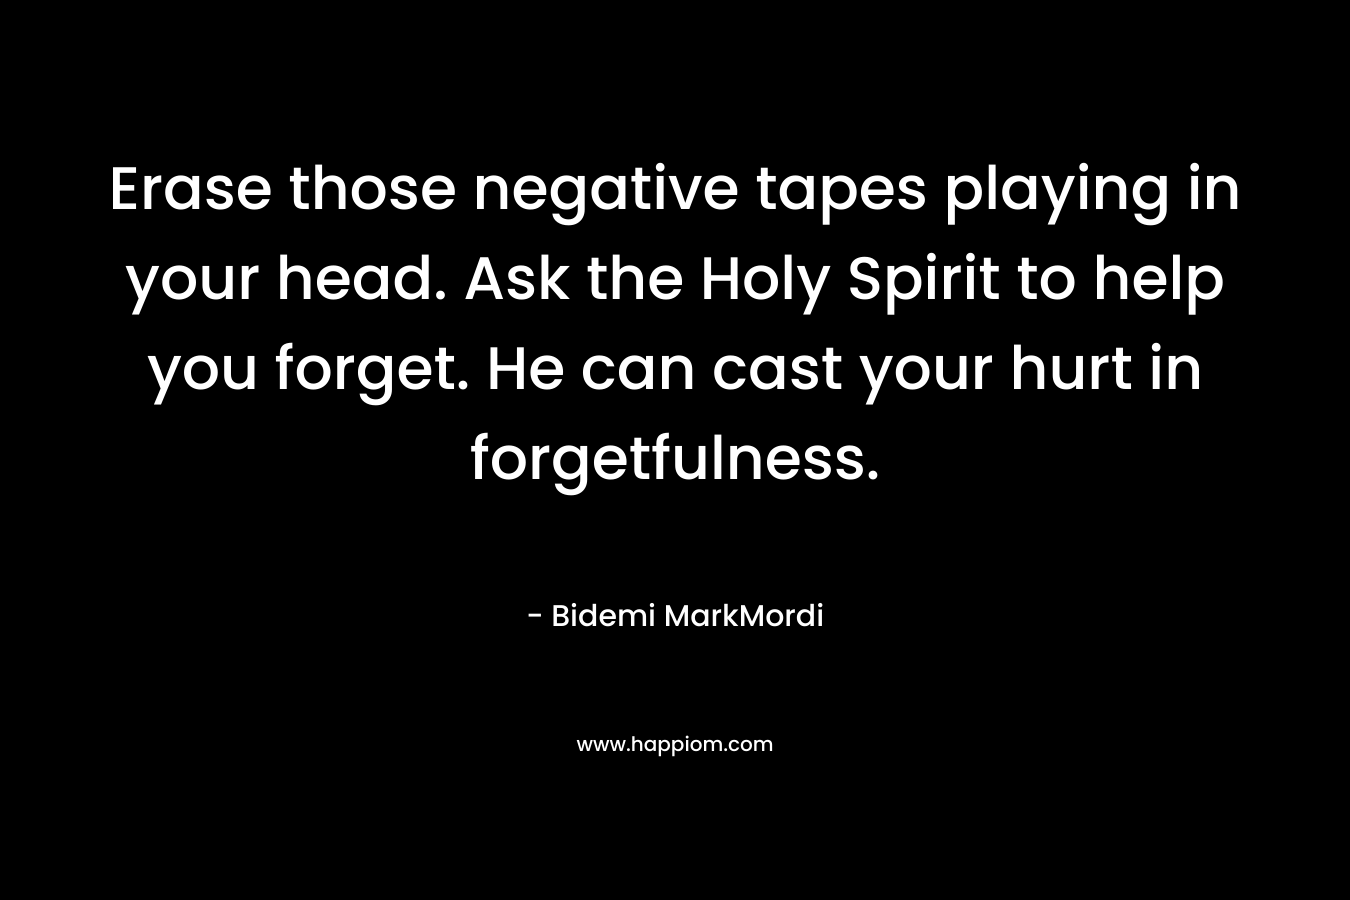 Erase those negative tapes playing in your head. Ask the Holy Spirit to help you forget. He can cast your hurt in forgetfulness.